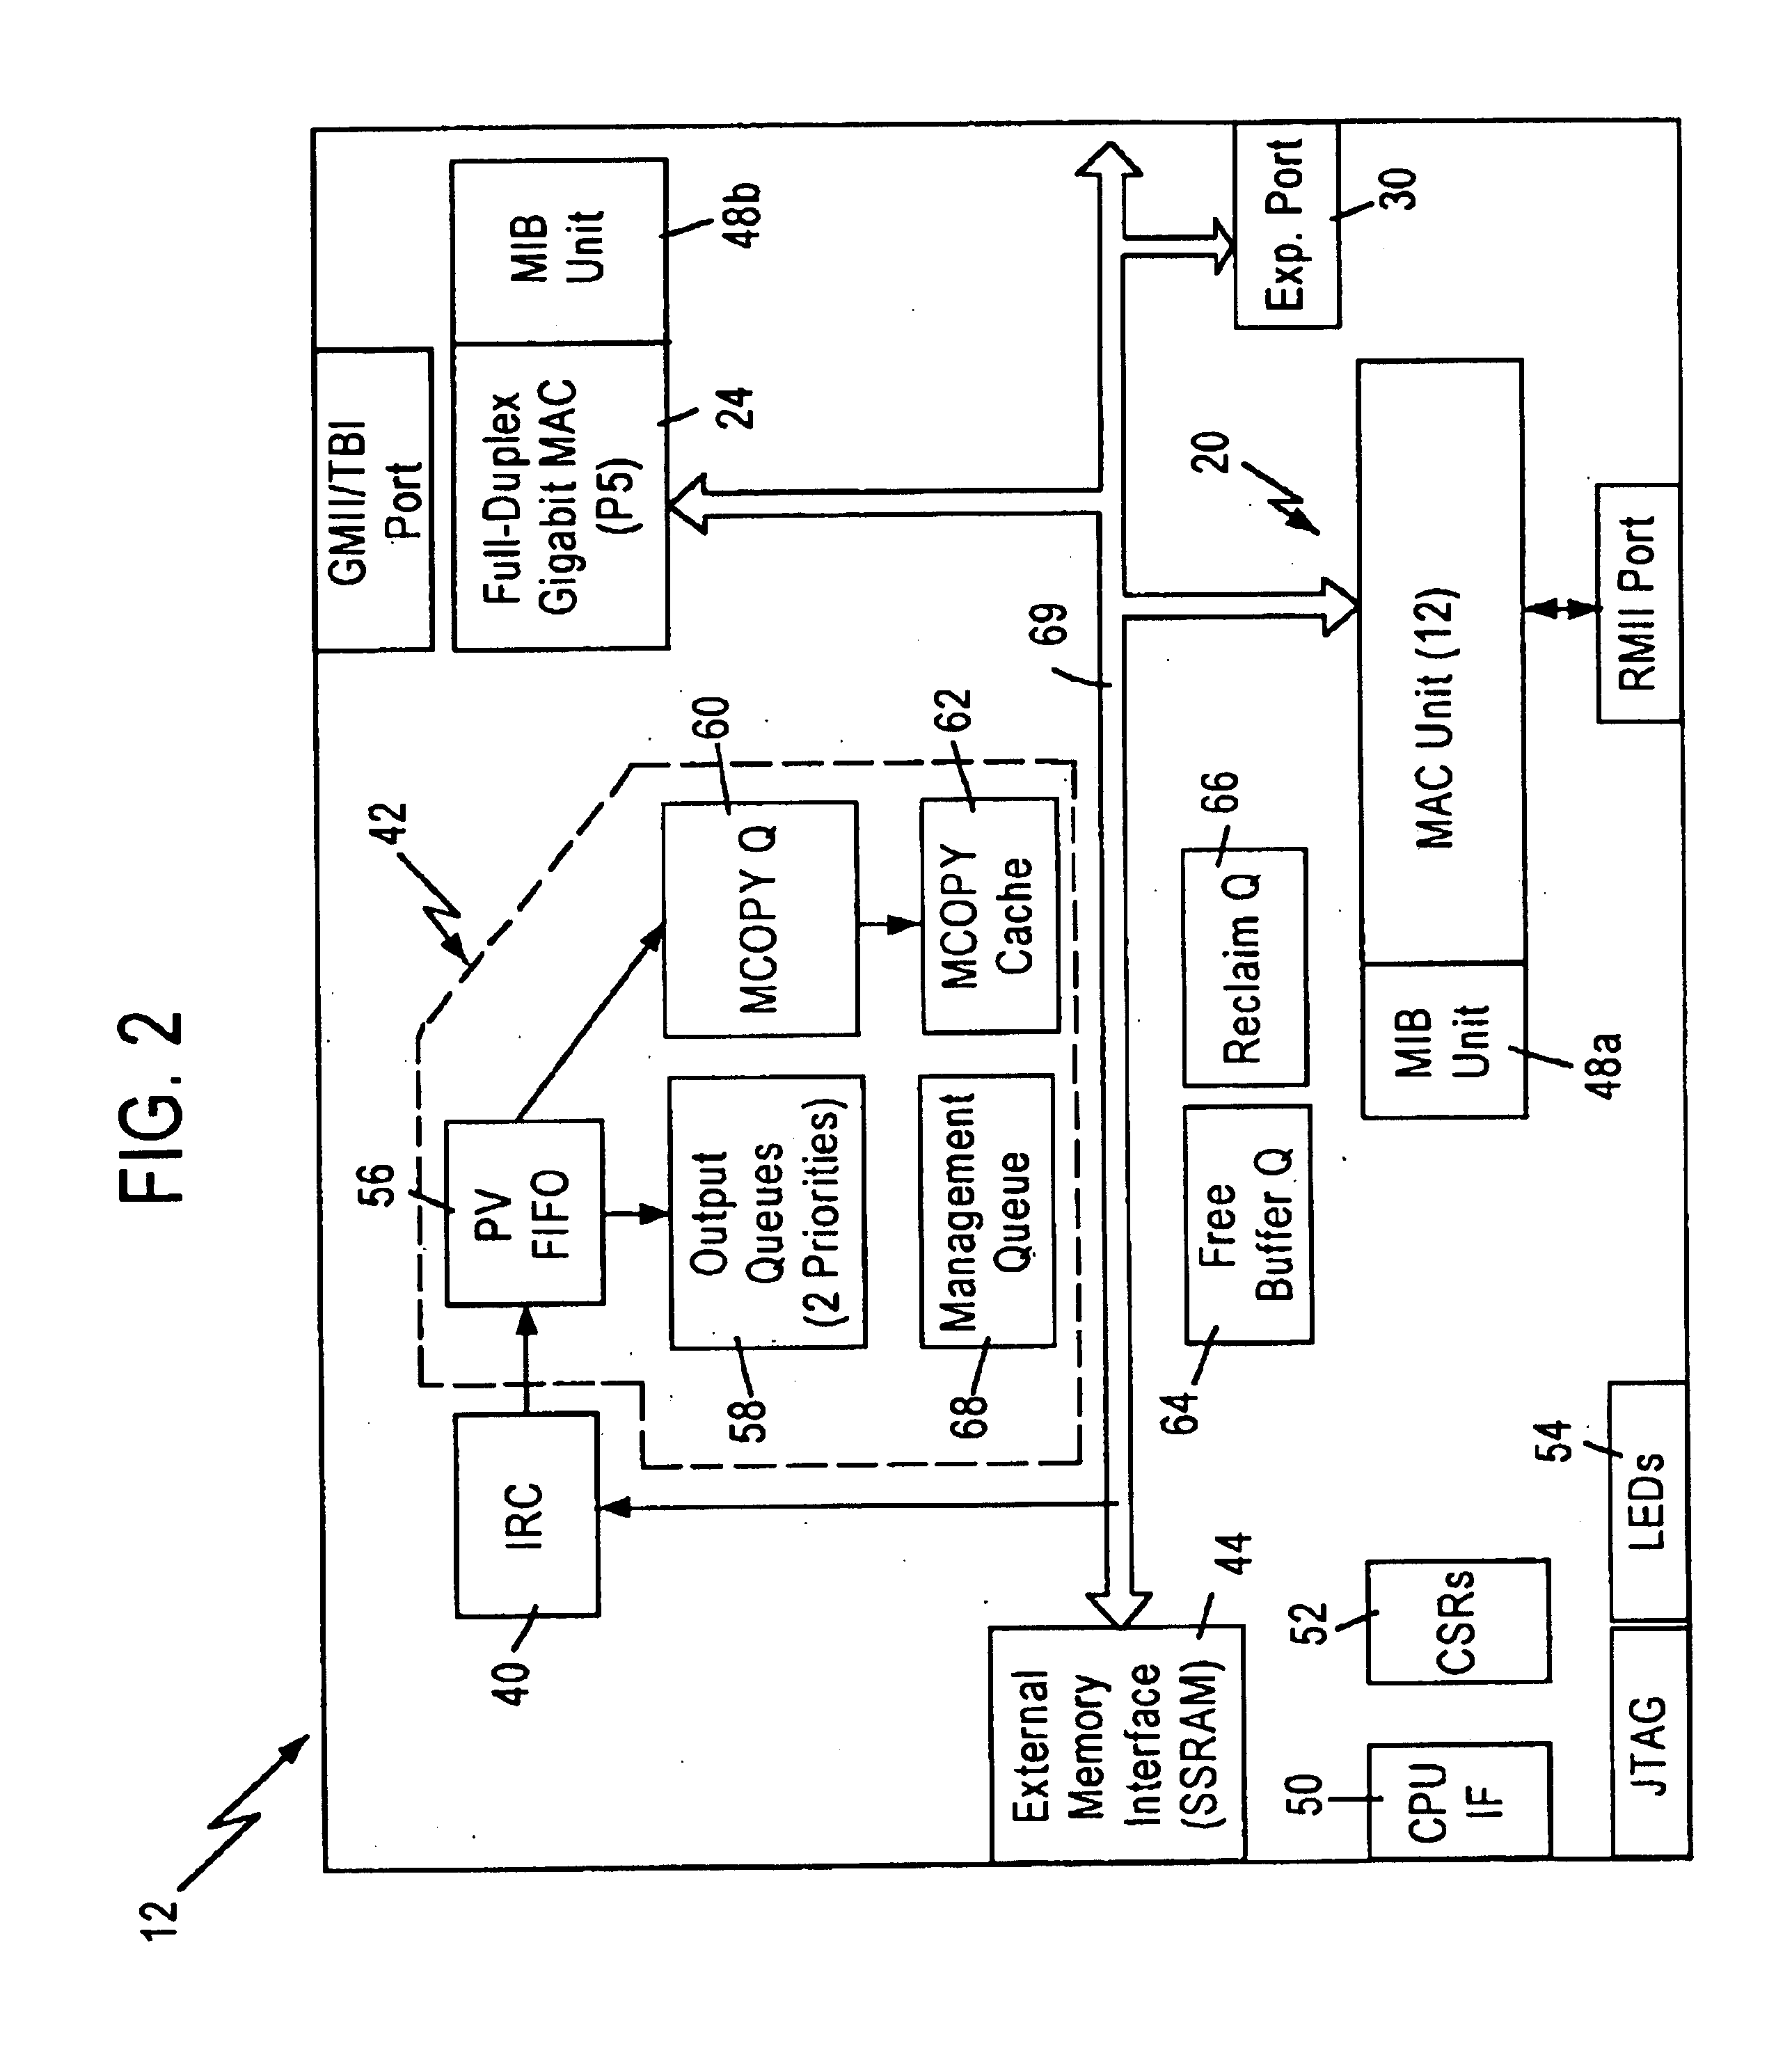 Method and apparatus for improving throughput of a rules checker logic